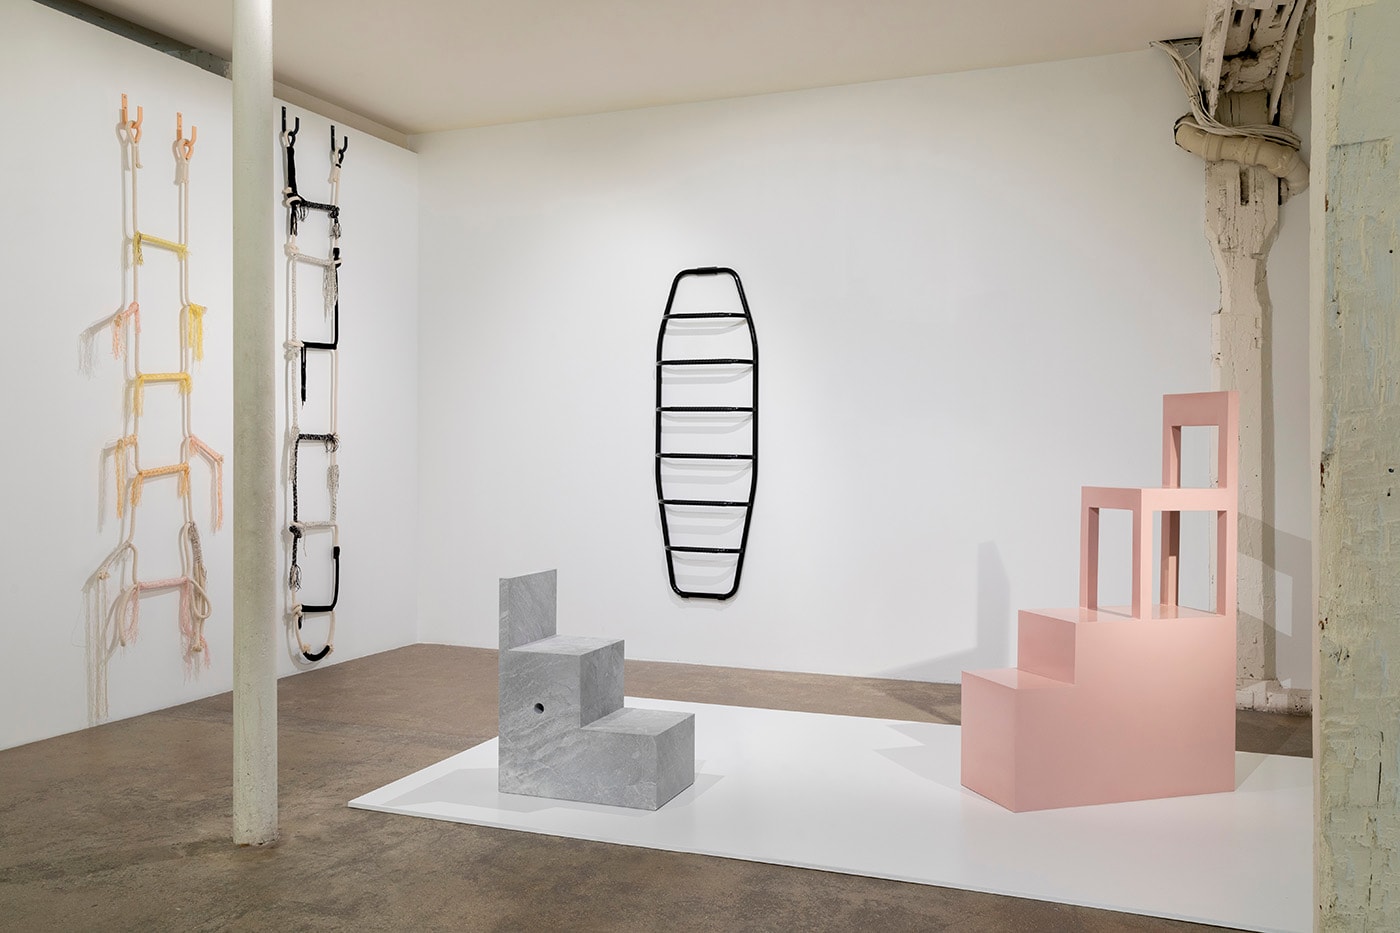 Virgil Abloh Designs a Ladder Honoring the Figures Who Shaped his Vision